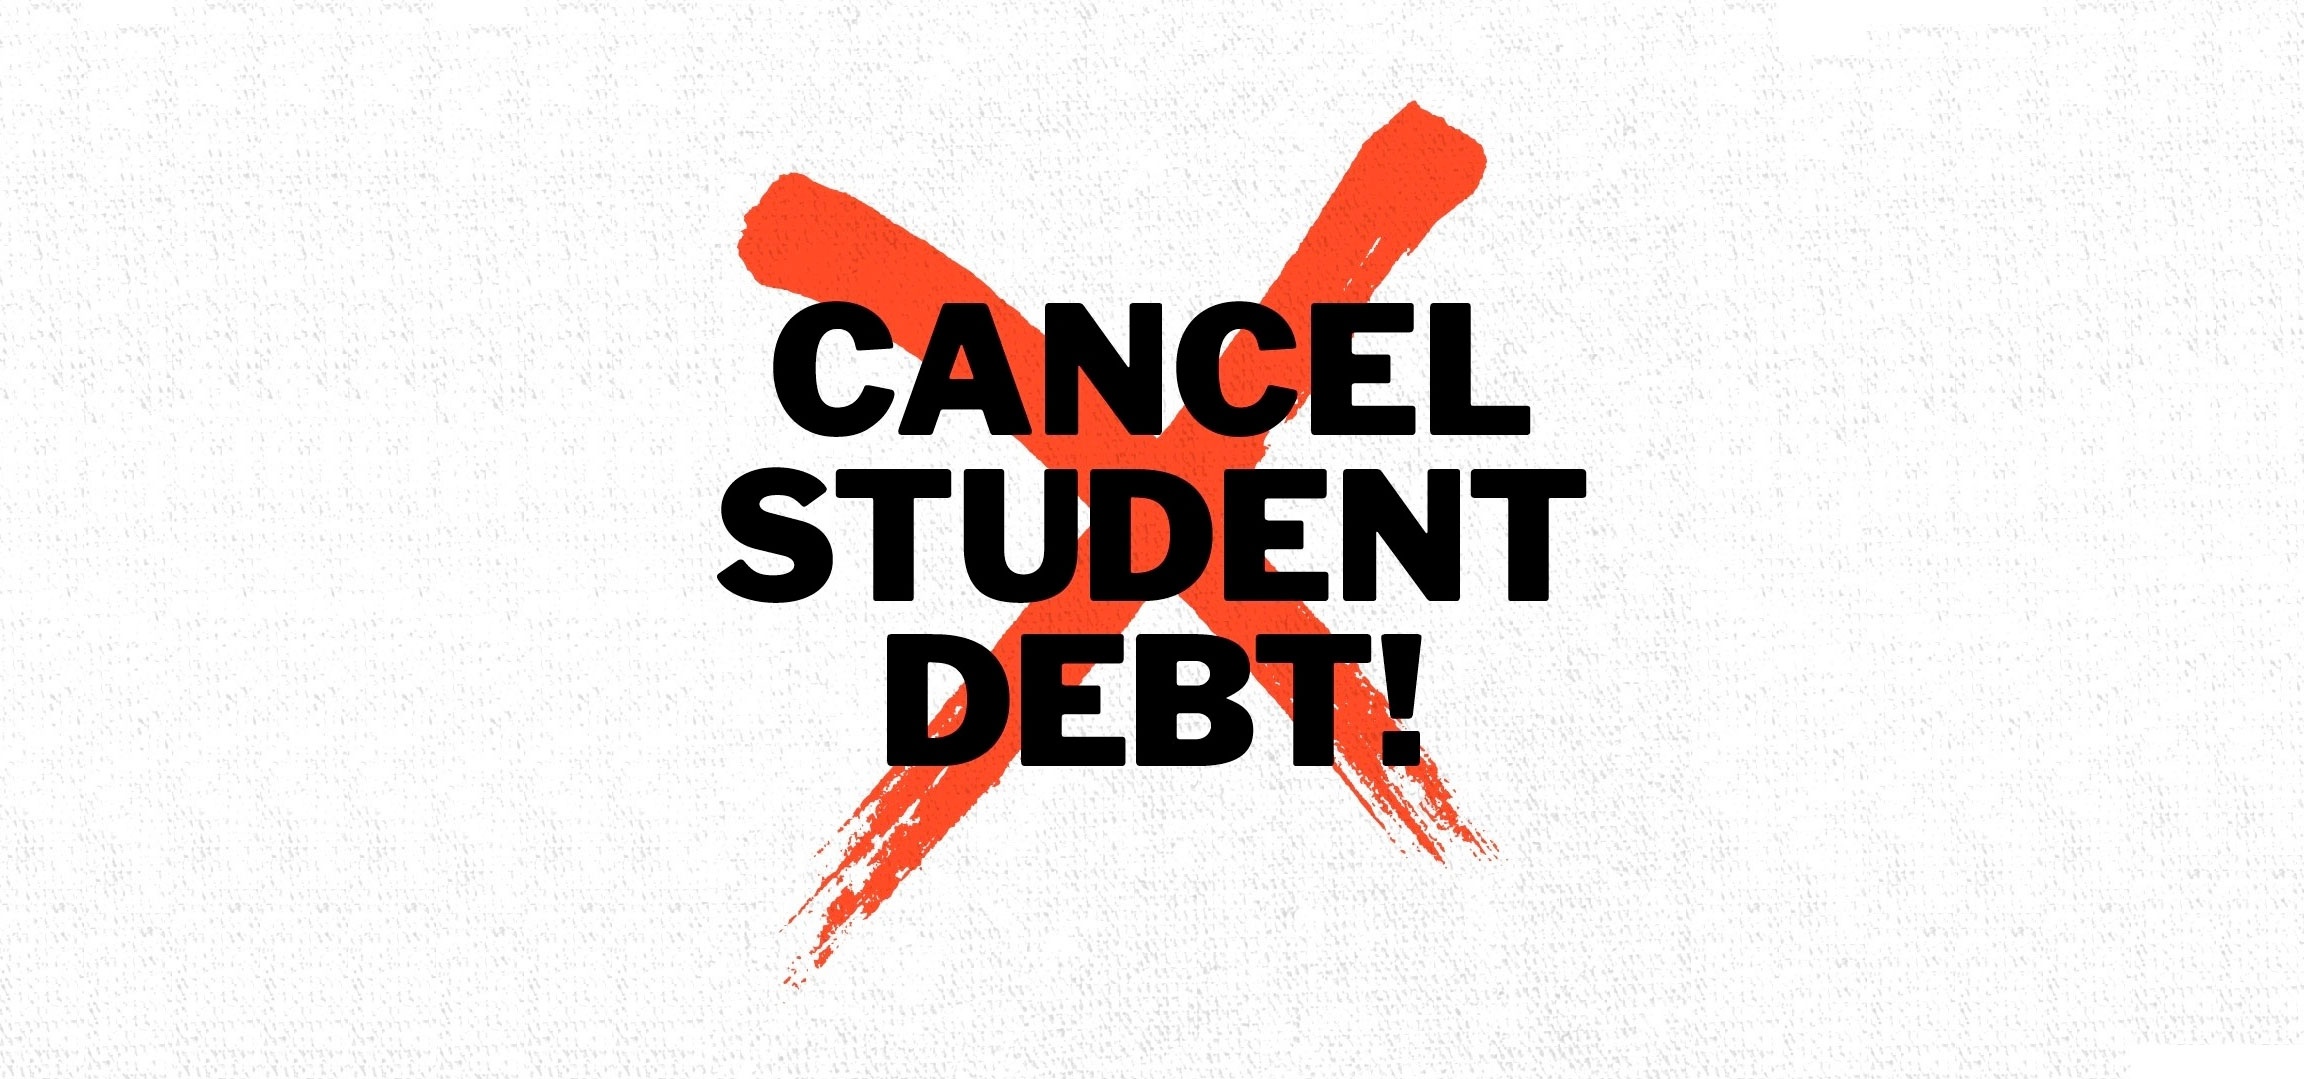 Black text says "Cancel Student Debt" with red "x" in the background.